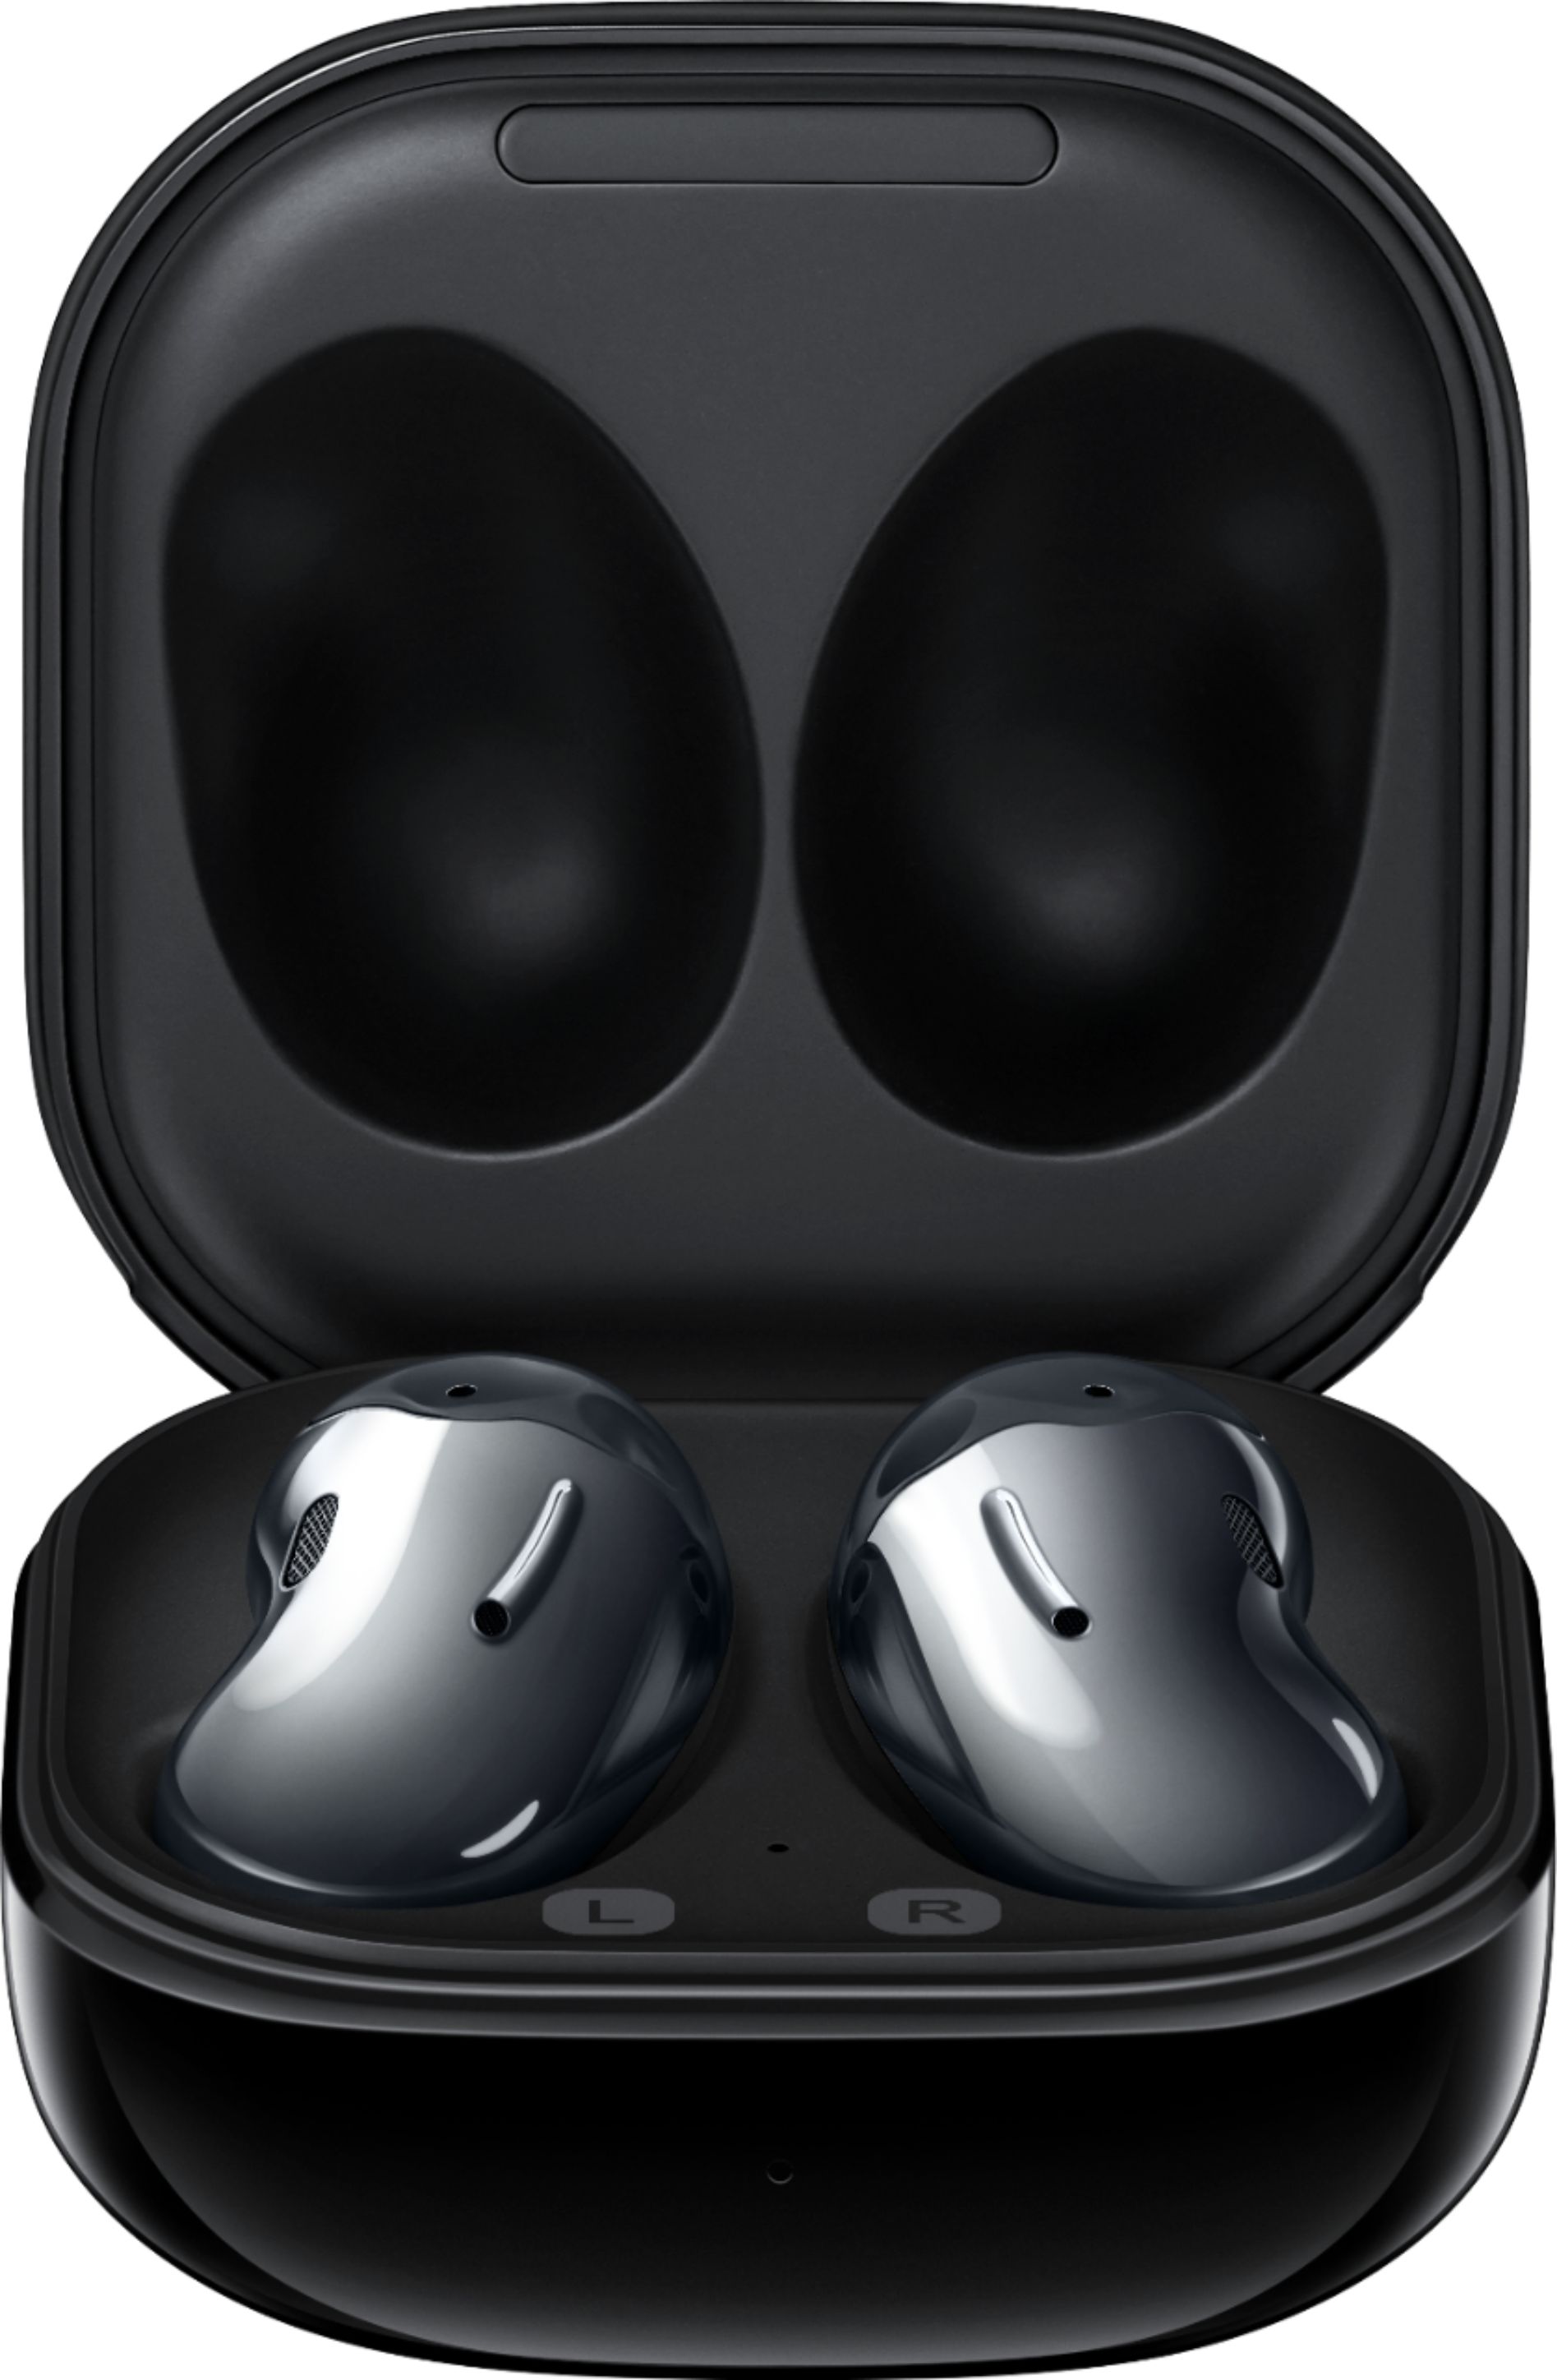 Purchase the Galaxy S21 Ultra 512GB Black or Galaxy Note20 5G Ultra 128GB  Smartphones and Get Bonus Galaxy Buds Live